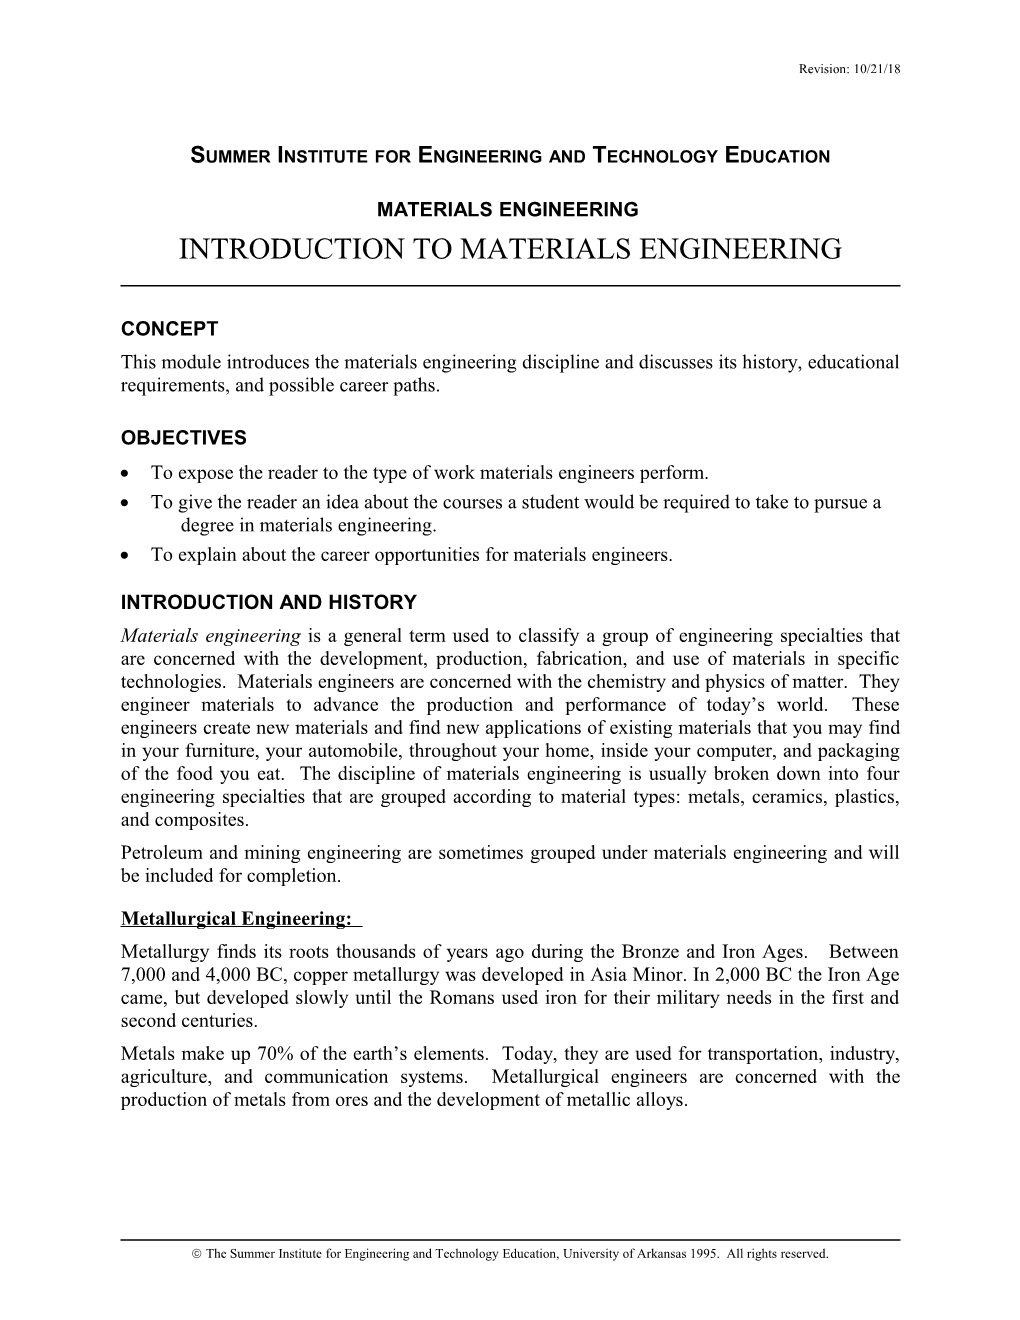 Introduction to Materials Engineering